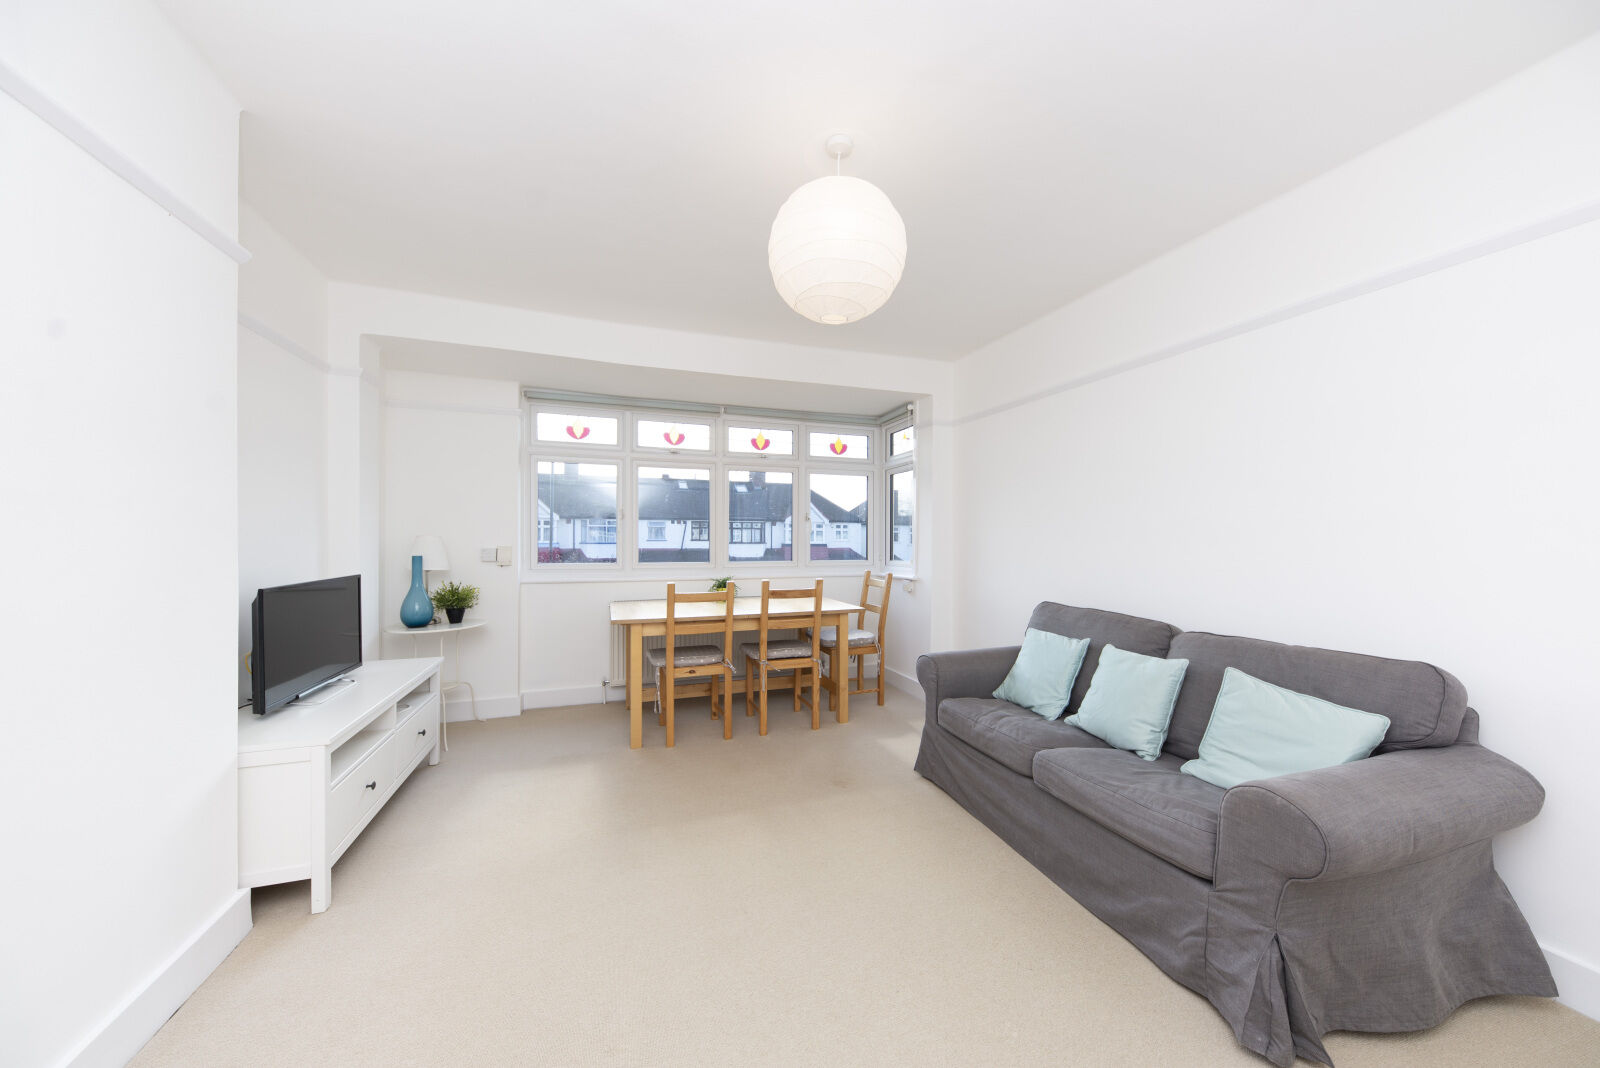 2 bedroom  maisonette to rent, Available now Cannon Hill Lane, London, SW20, main image